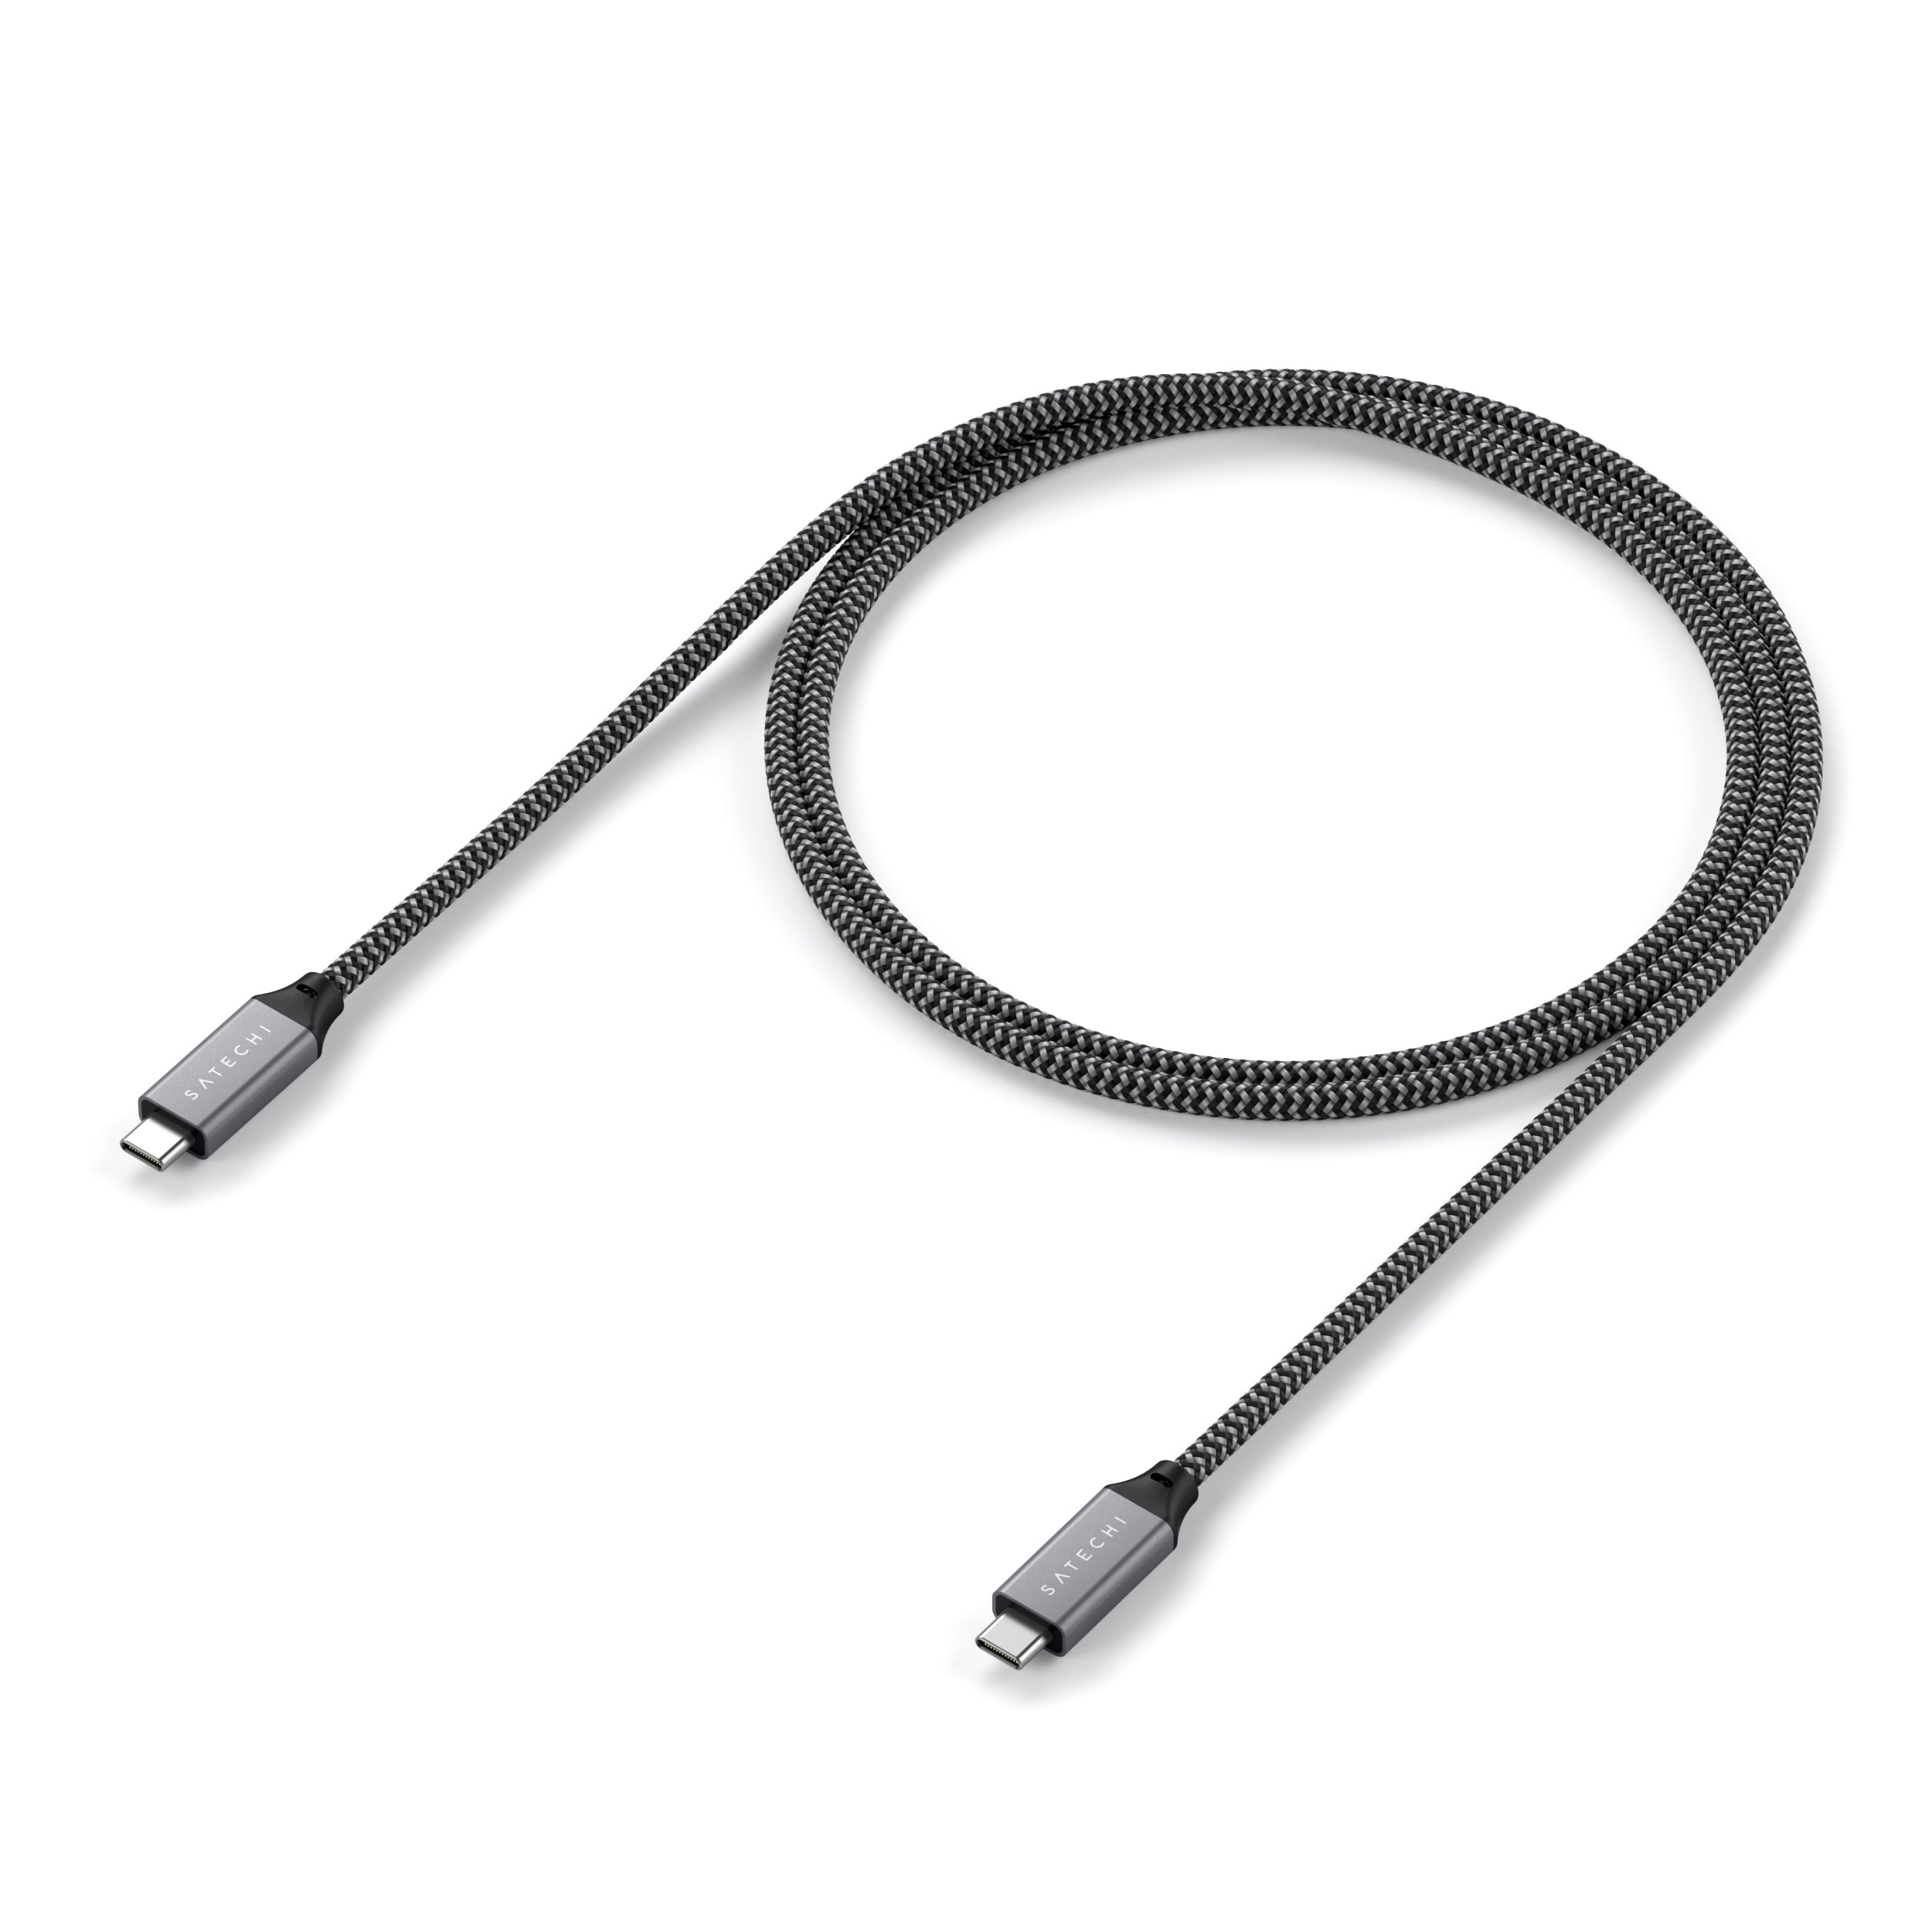 USB4 C to C Cable | Power & Charging Accessories